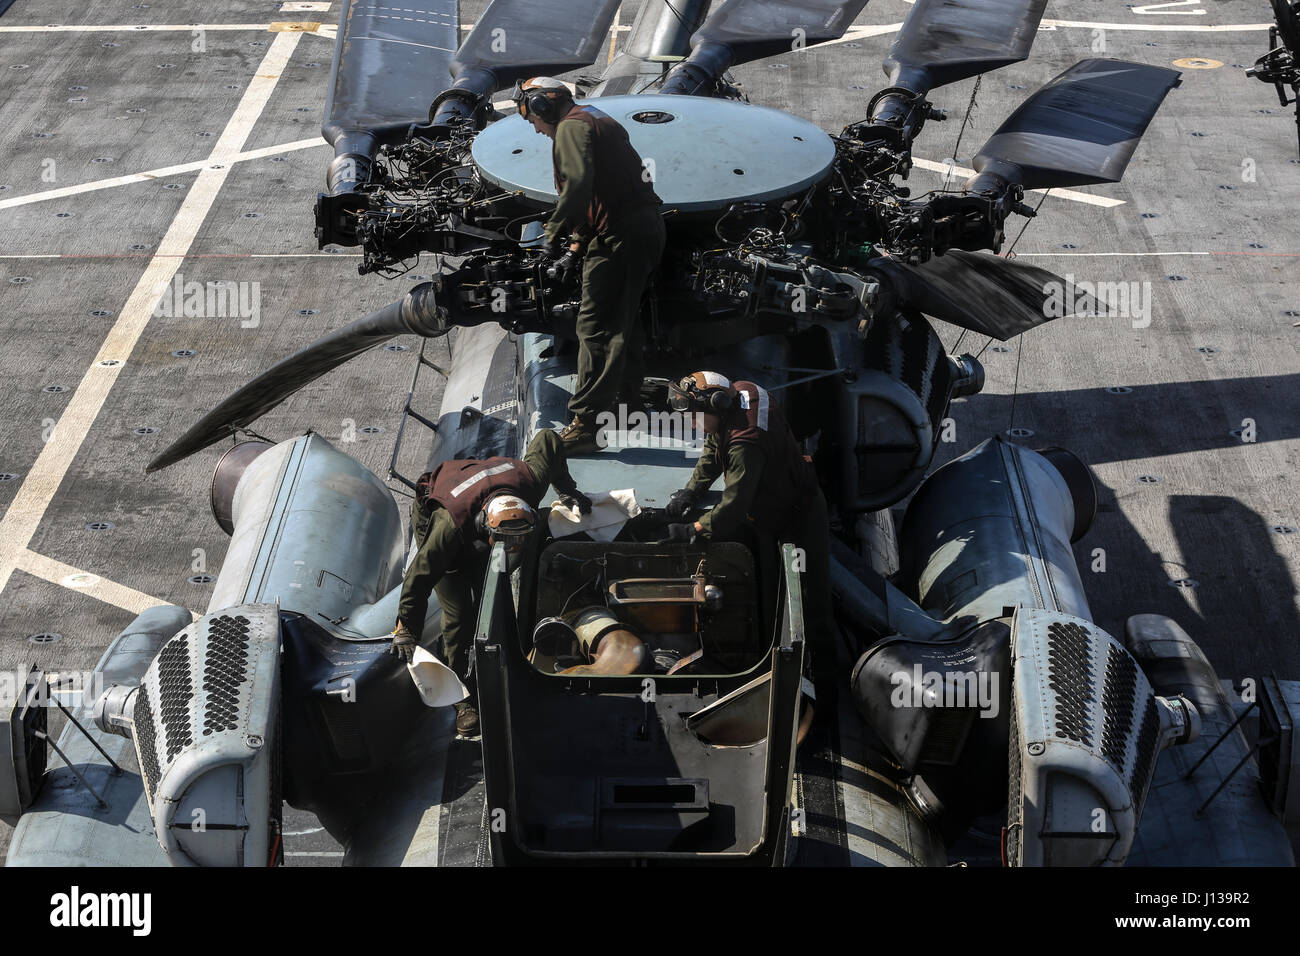 PACIFIC OCEAN, Calif., -- Marines conduct maintenance on a CH-53E Super Stallion on the flight deck of the USS San Diego (LPD-22), April 11, 2017. The 15th Marine Expeditionary Unit uses the air assets provided from Marine Medium Tiltrotor Squadron 161 (Reinforced) to transport personnel and equipment from ship-to-ship and ship-to-shore efficiently. The 15th MEU’s rapid ability to mobilize people and equipment makes the amphibious force uniquely postured to respond to any mission around the globe. (U.S. Marine Corps photo by Cpl. Timothy Valero) Stock Photo